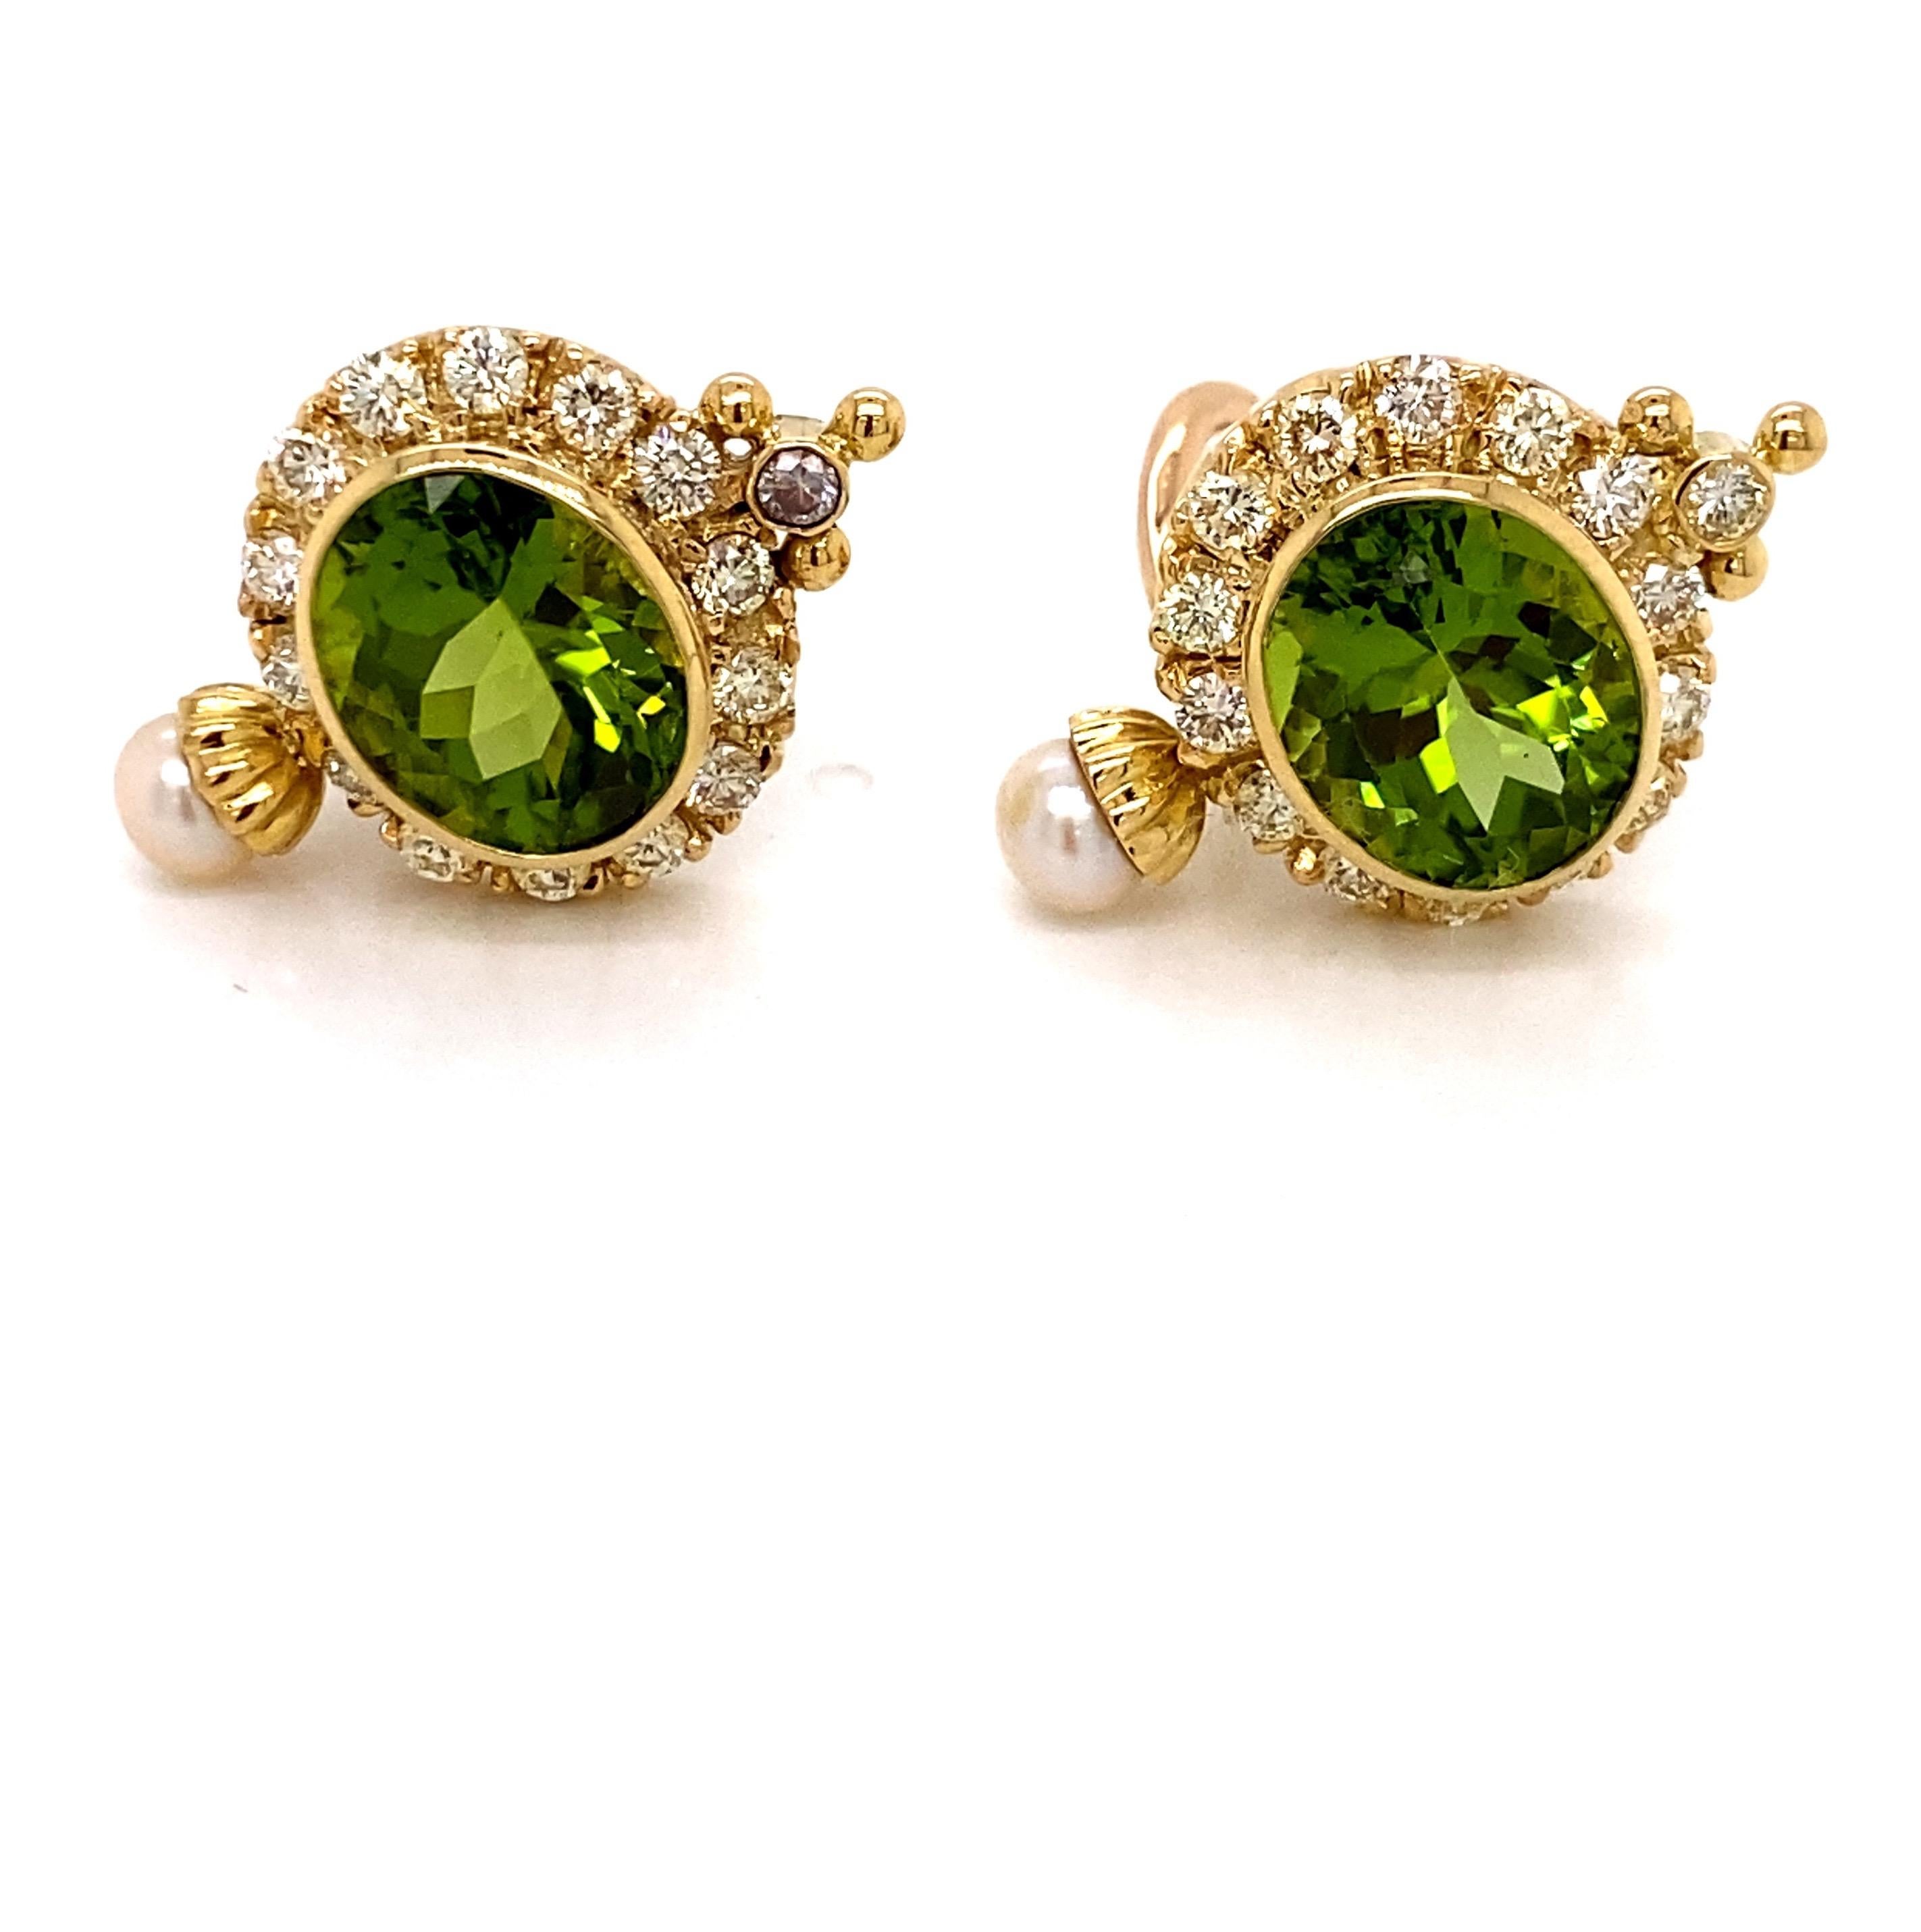 Modern Vintage 18 Karat Yellow Gold Peridot and Diamond Clip Earrings with Pearls For Sale